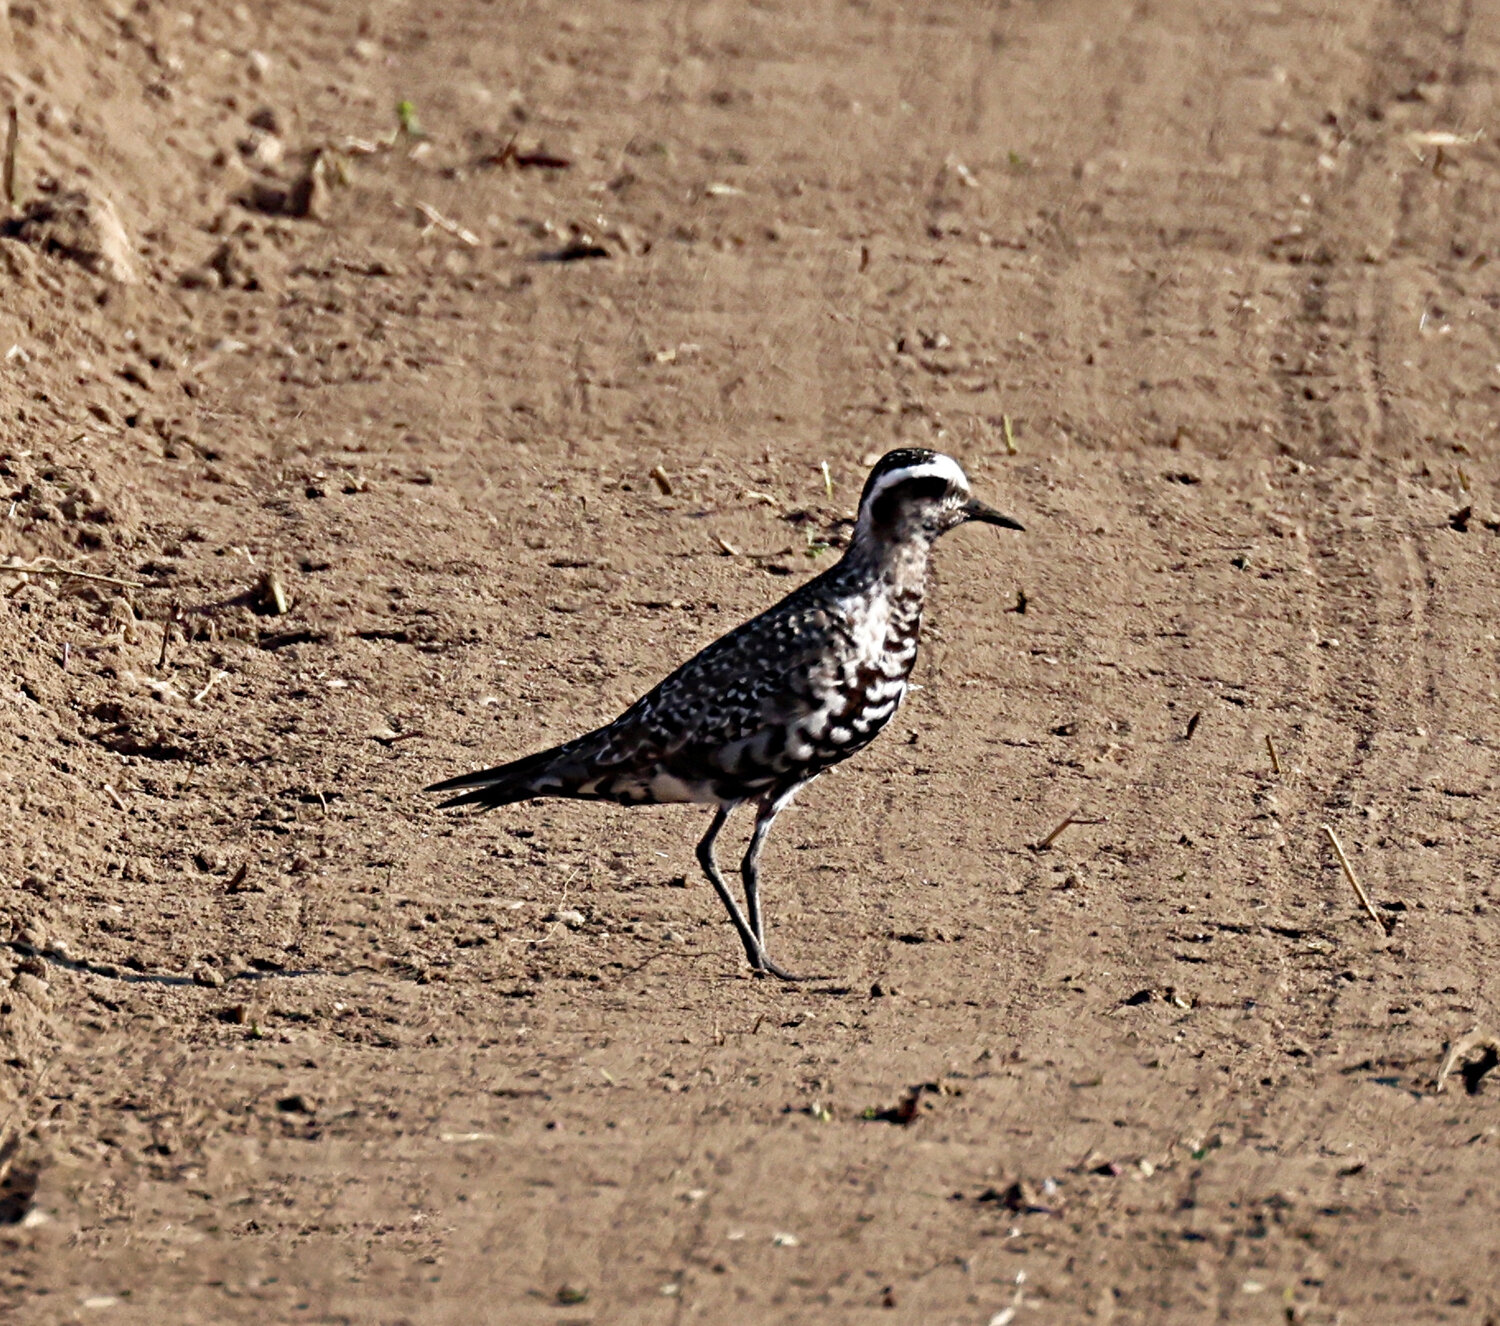 Over a dozen America Golden-Plovers like this one were spotted Friday at Bartlett’s Farm.